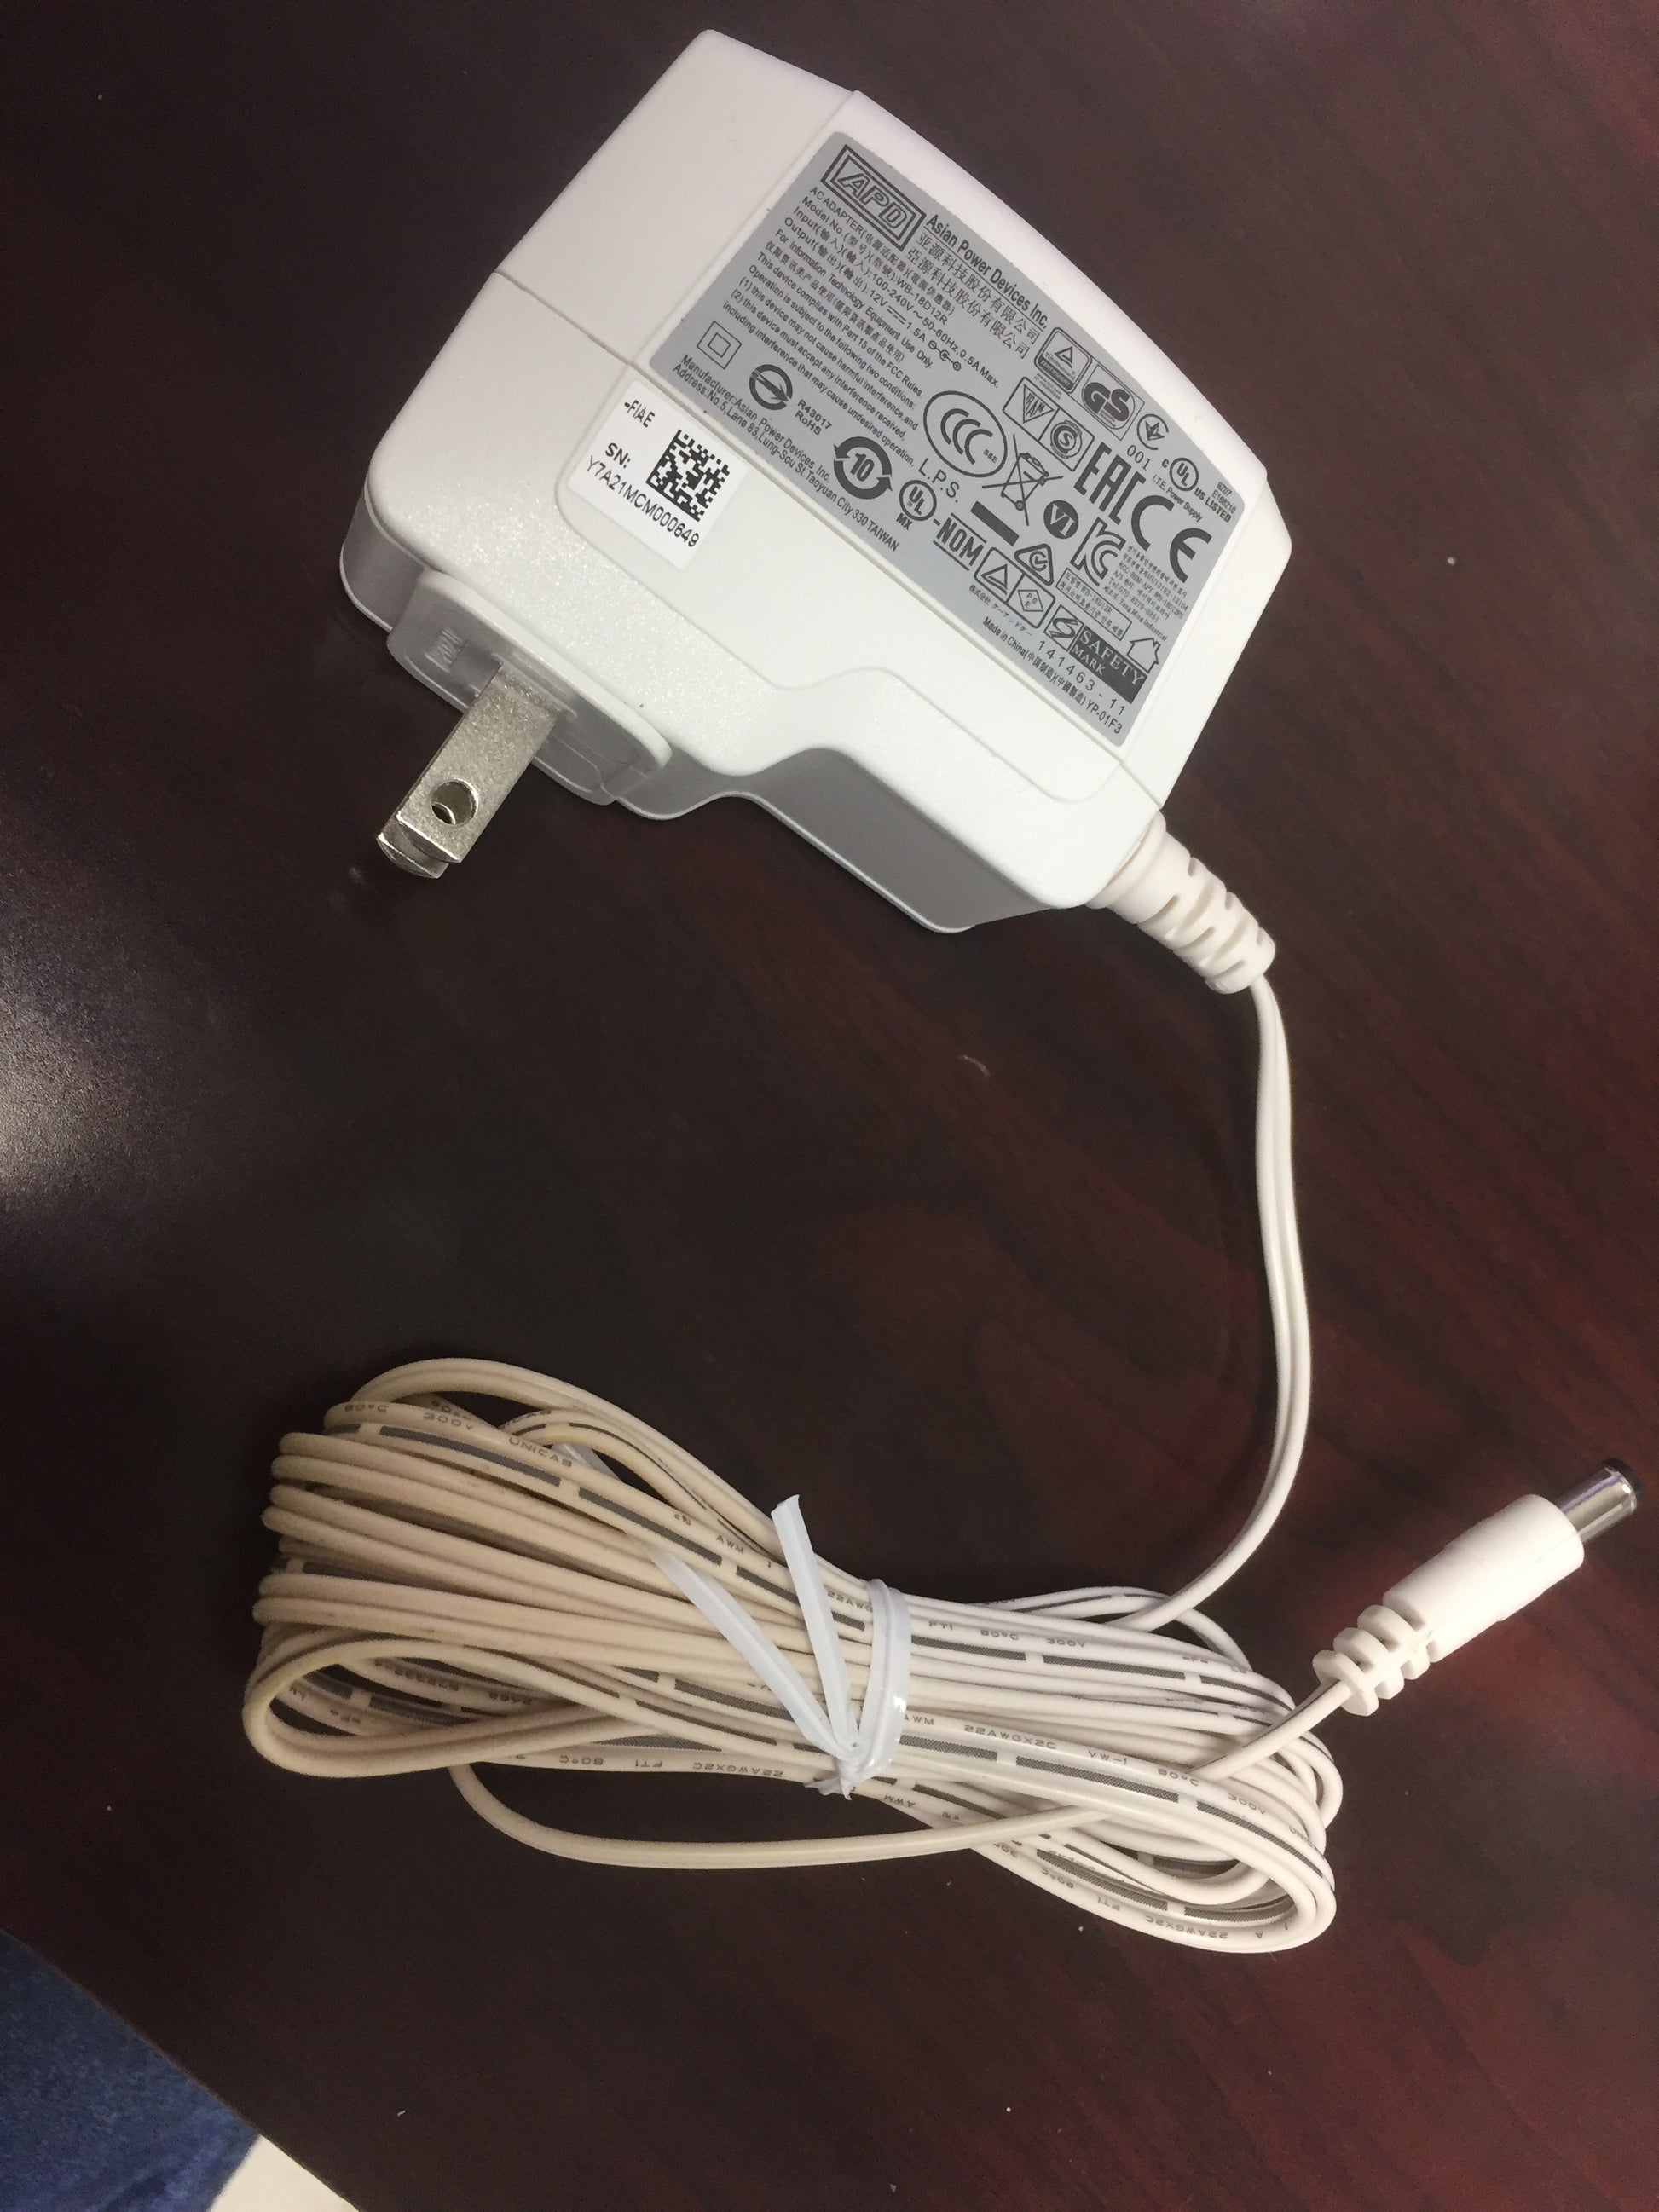 12 VDC 1.5 AMP POWER ADAPTER FOR USE WITH WC0200NX